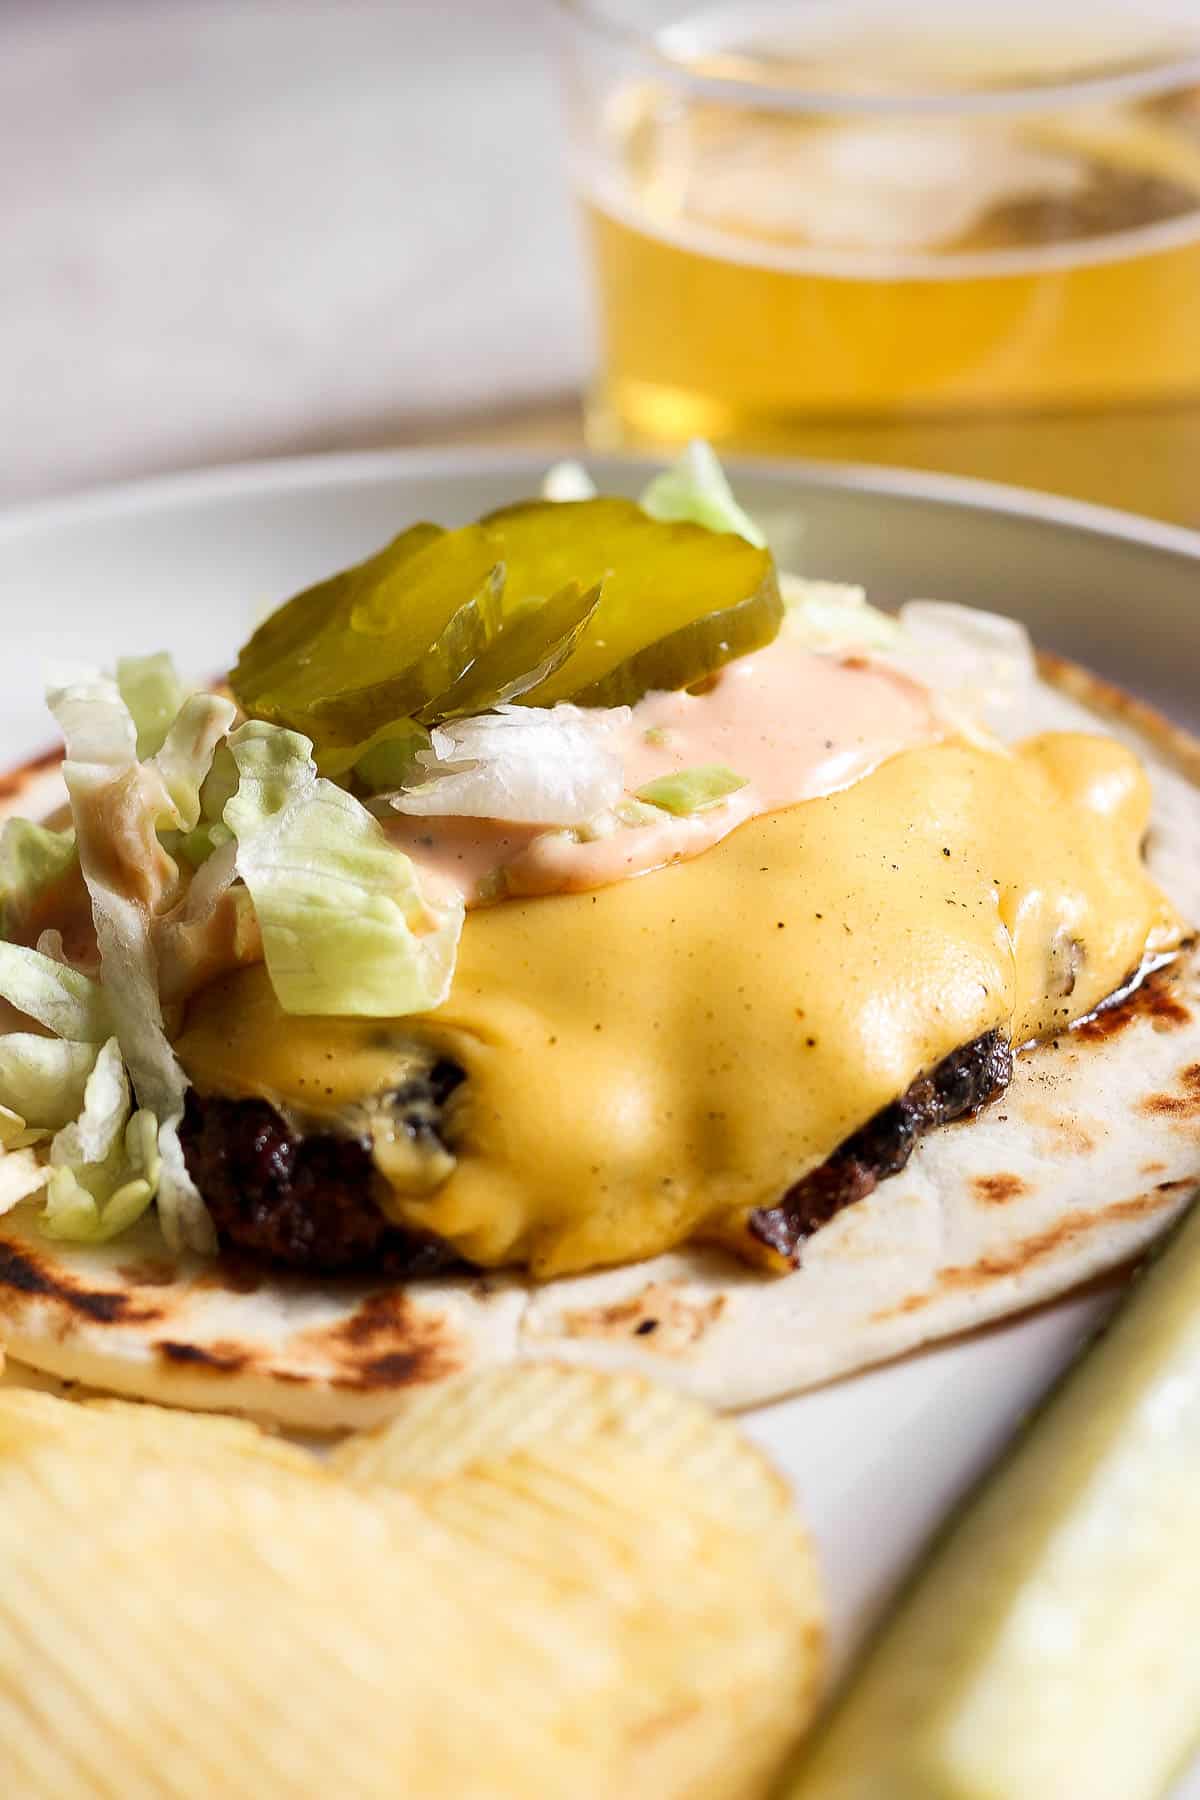 The tortilla, burger patty, cheese, burger sauce, lettuce, and pickles are on a plate.